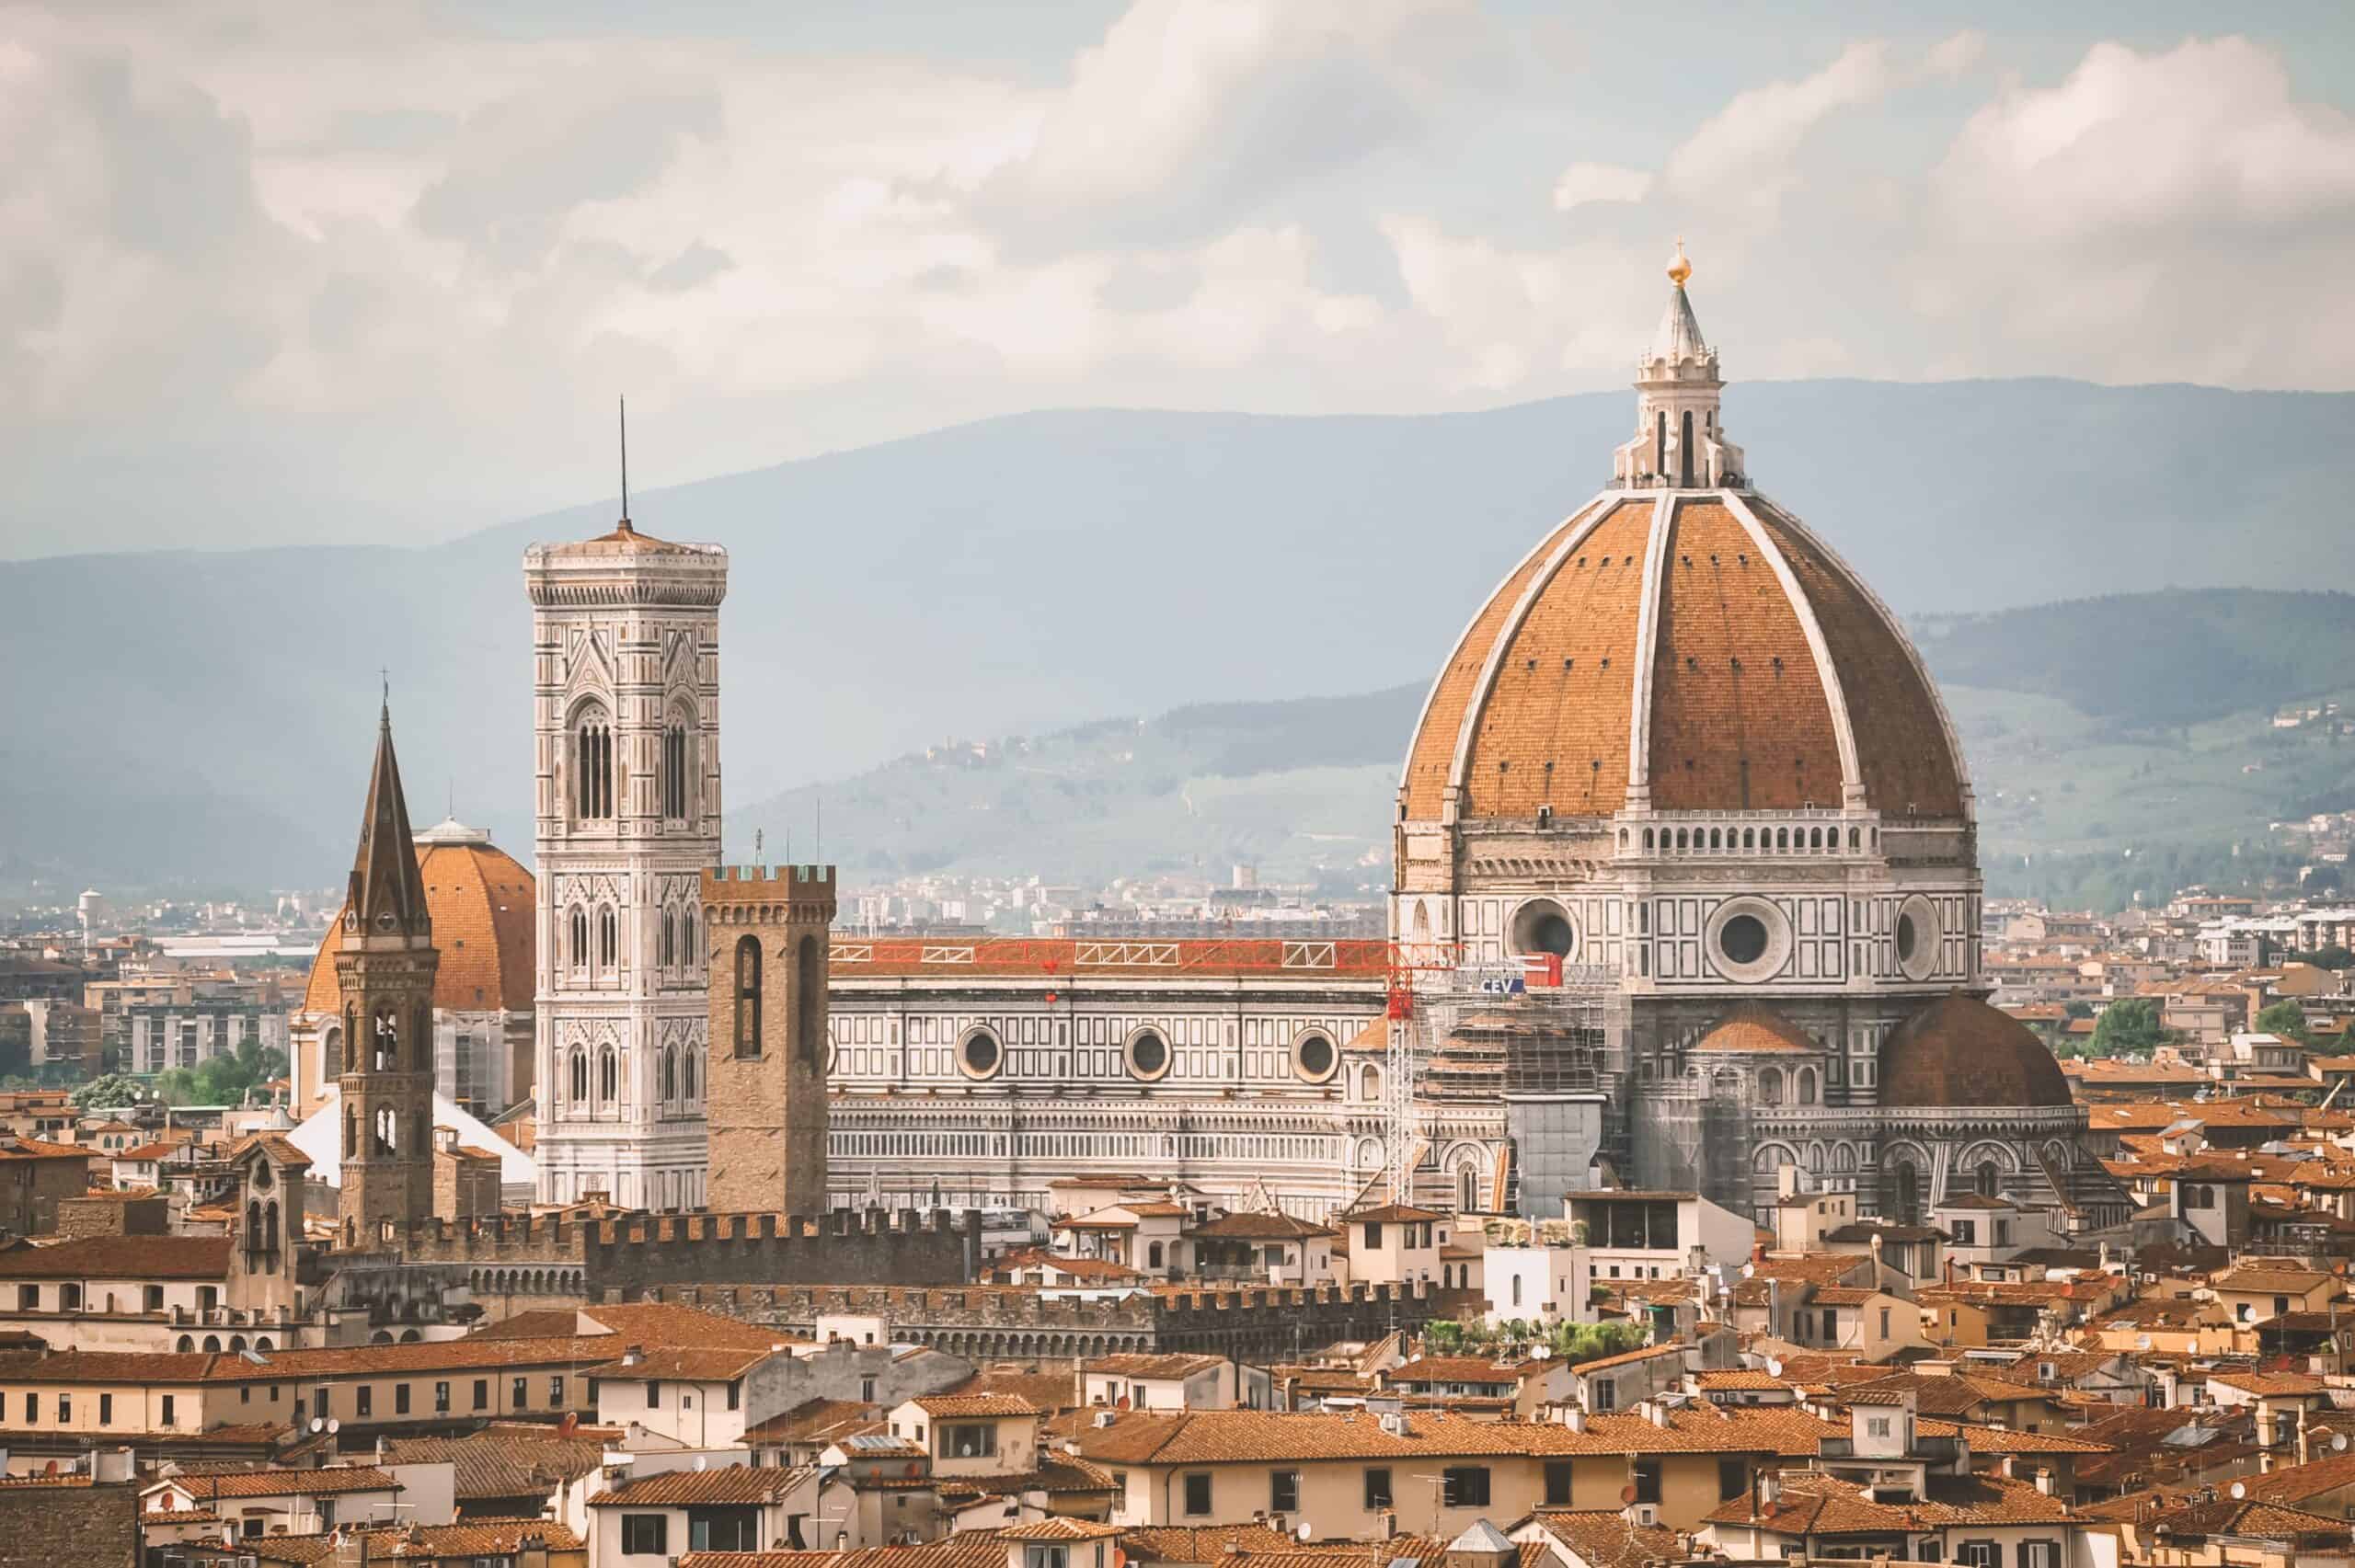 <p>Florence, the birthplace of the Renaissance, invites retirees to immerse themselves in art, history, and Italian charm. Wander through museums, savor Tuscan cuisine, and experience the city’s timeless beauty.</p>